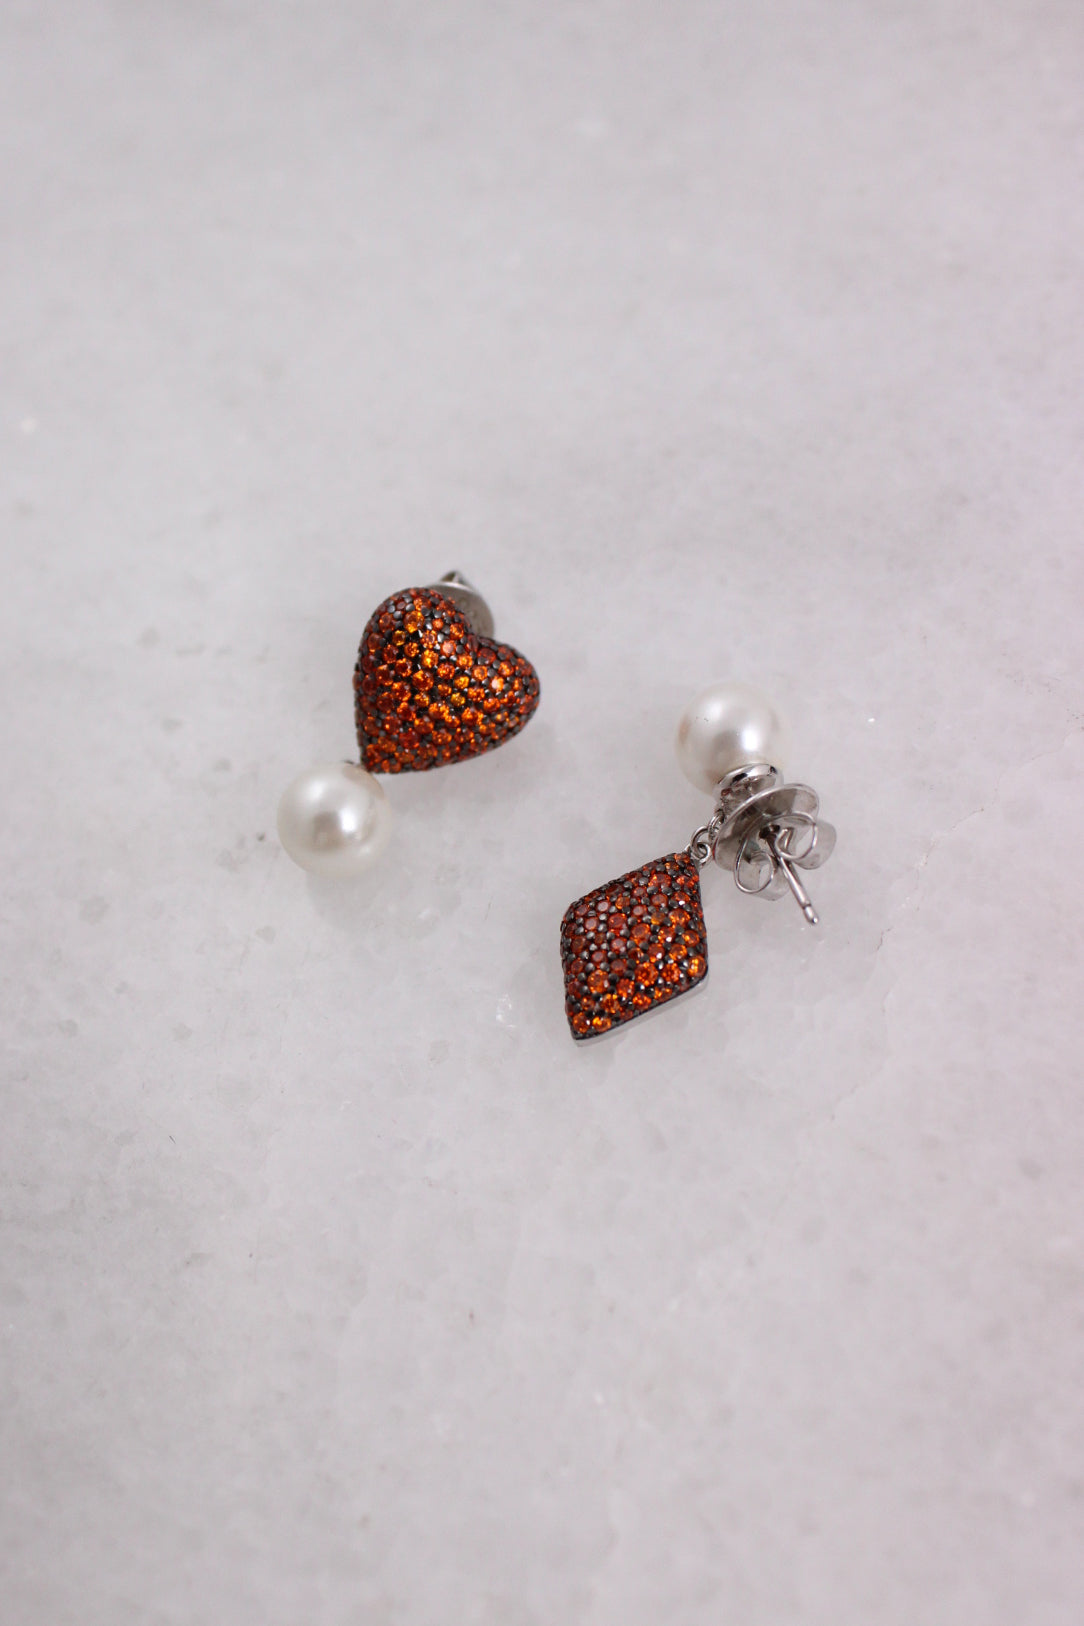 ¾ angle top detailed view of heart and diamond chapped earring charms adorned with orange ministones laid flat.